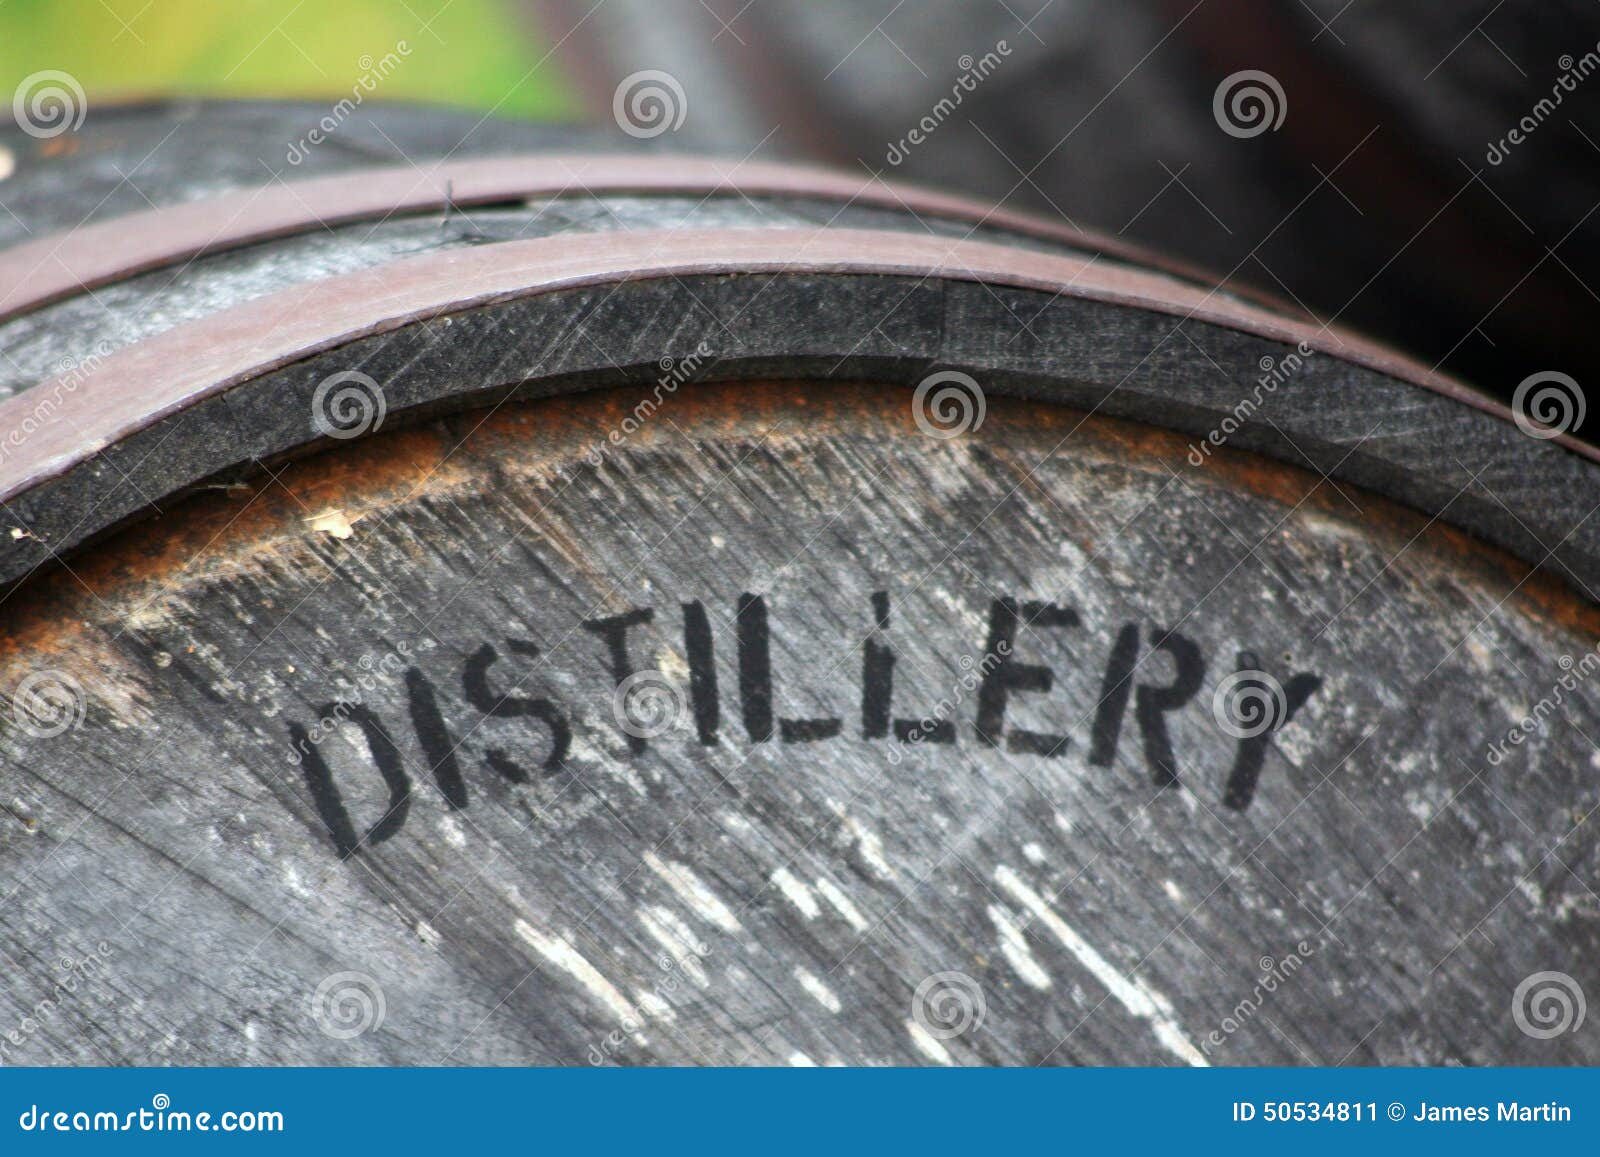 aging barrel for whiskey or bourbon